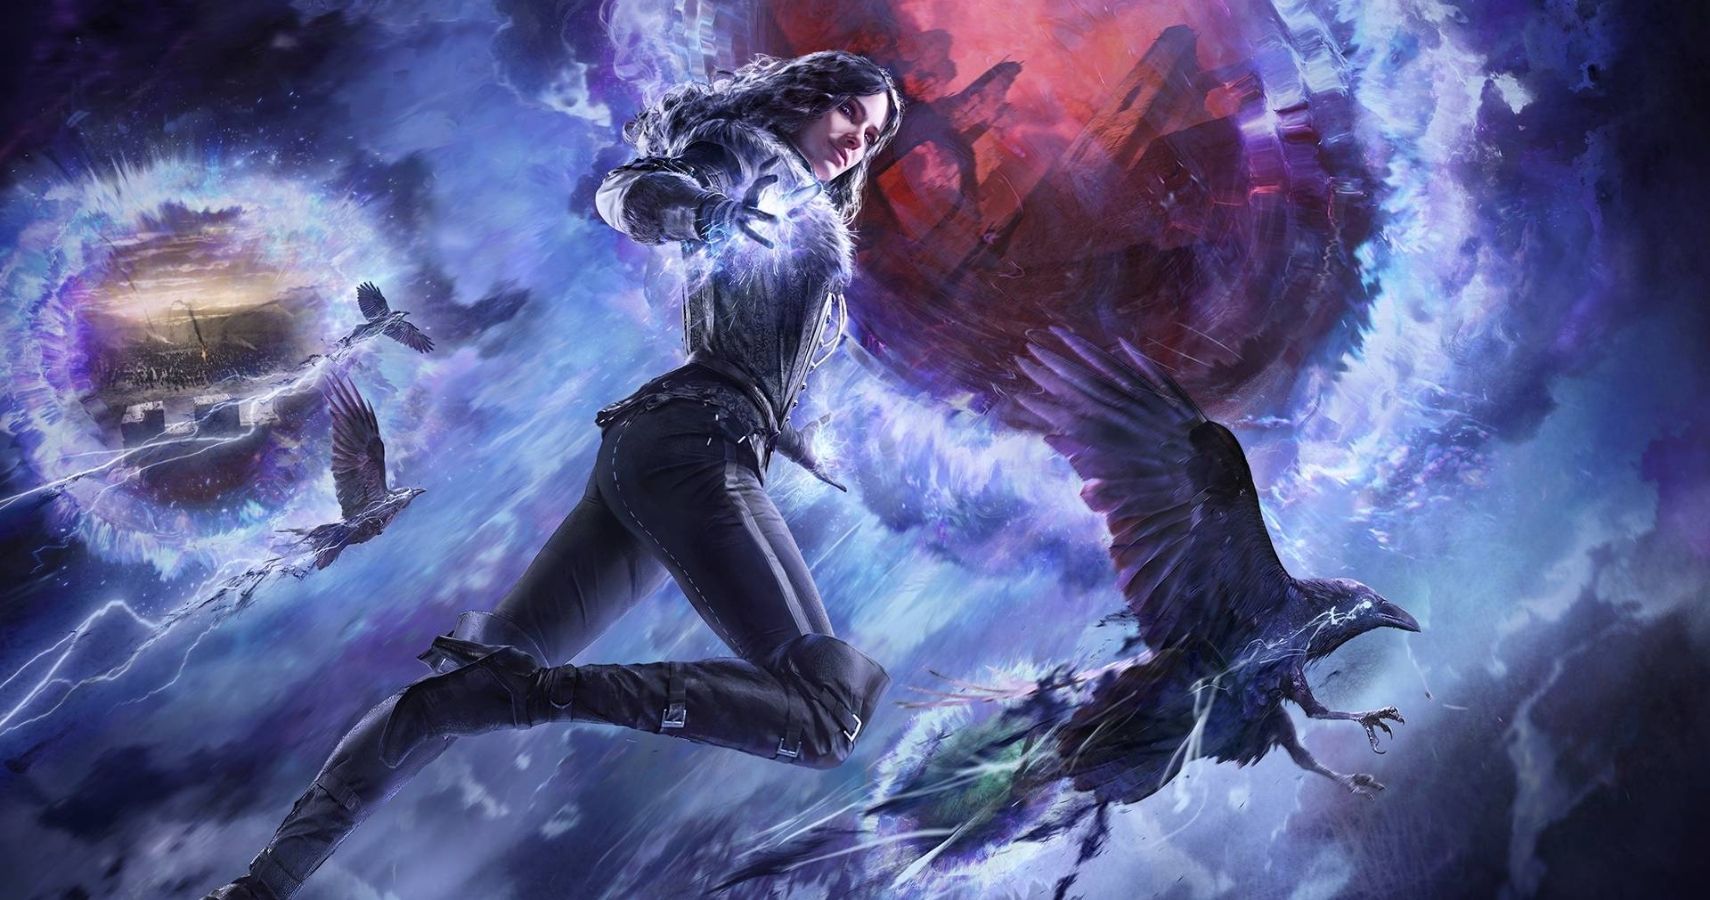 Yennefer Of Vengerberg Headlines Journey Season Four Of GWENT The Witcher Card Game